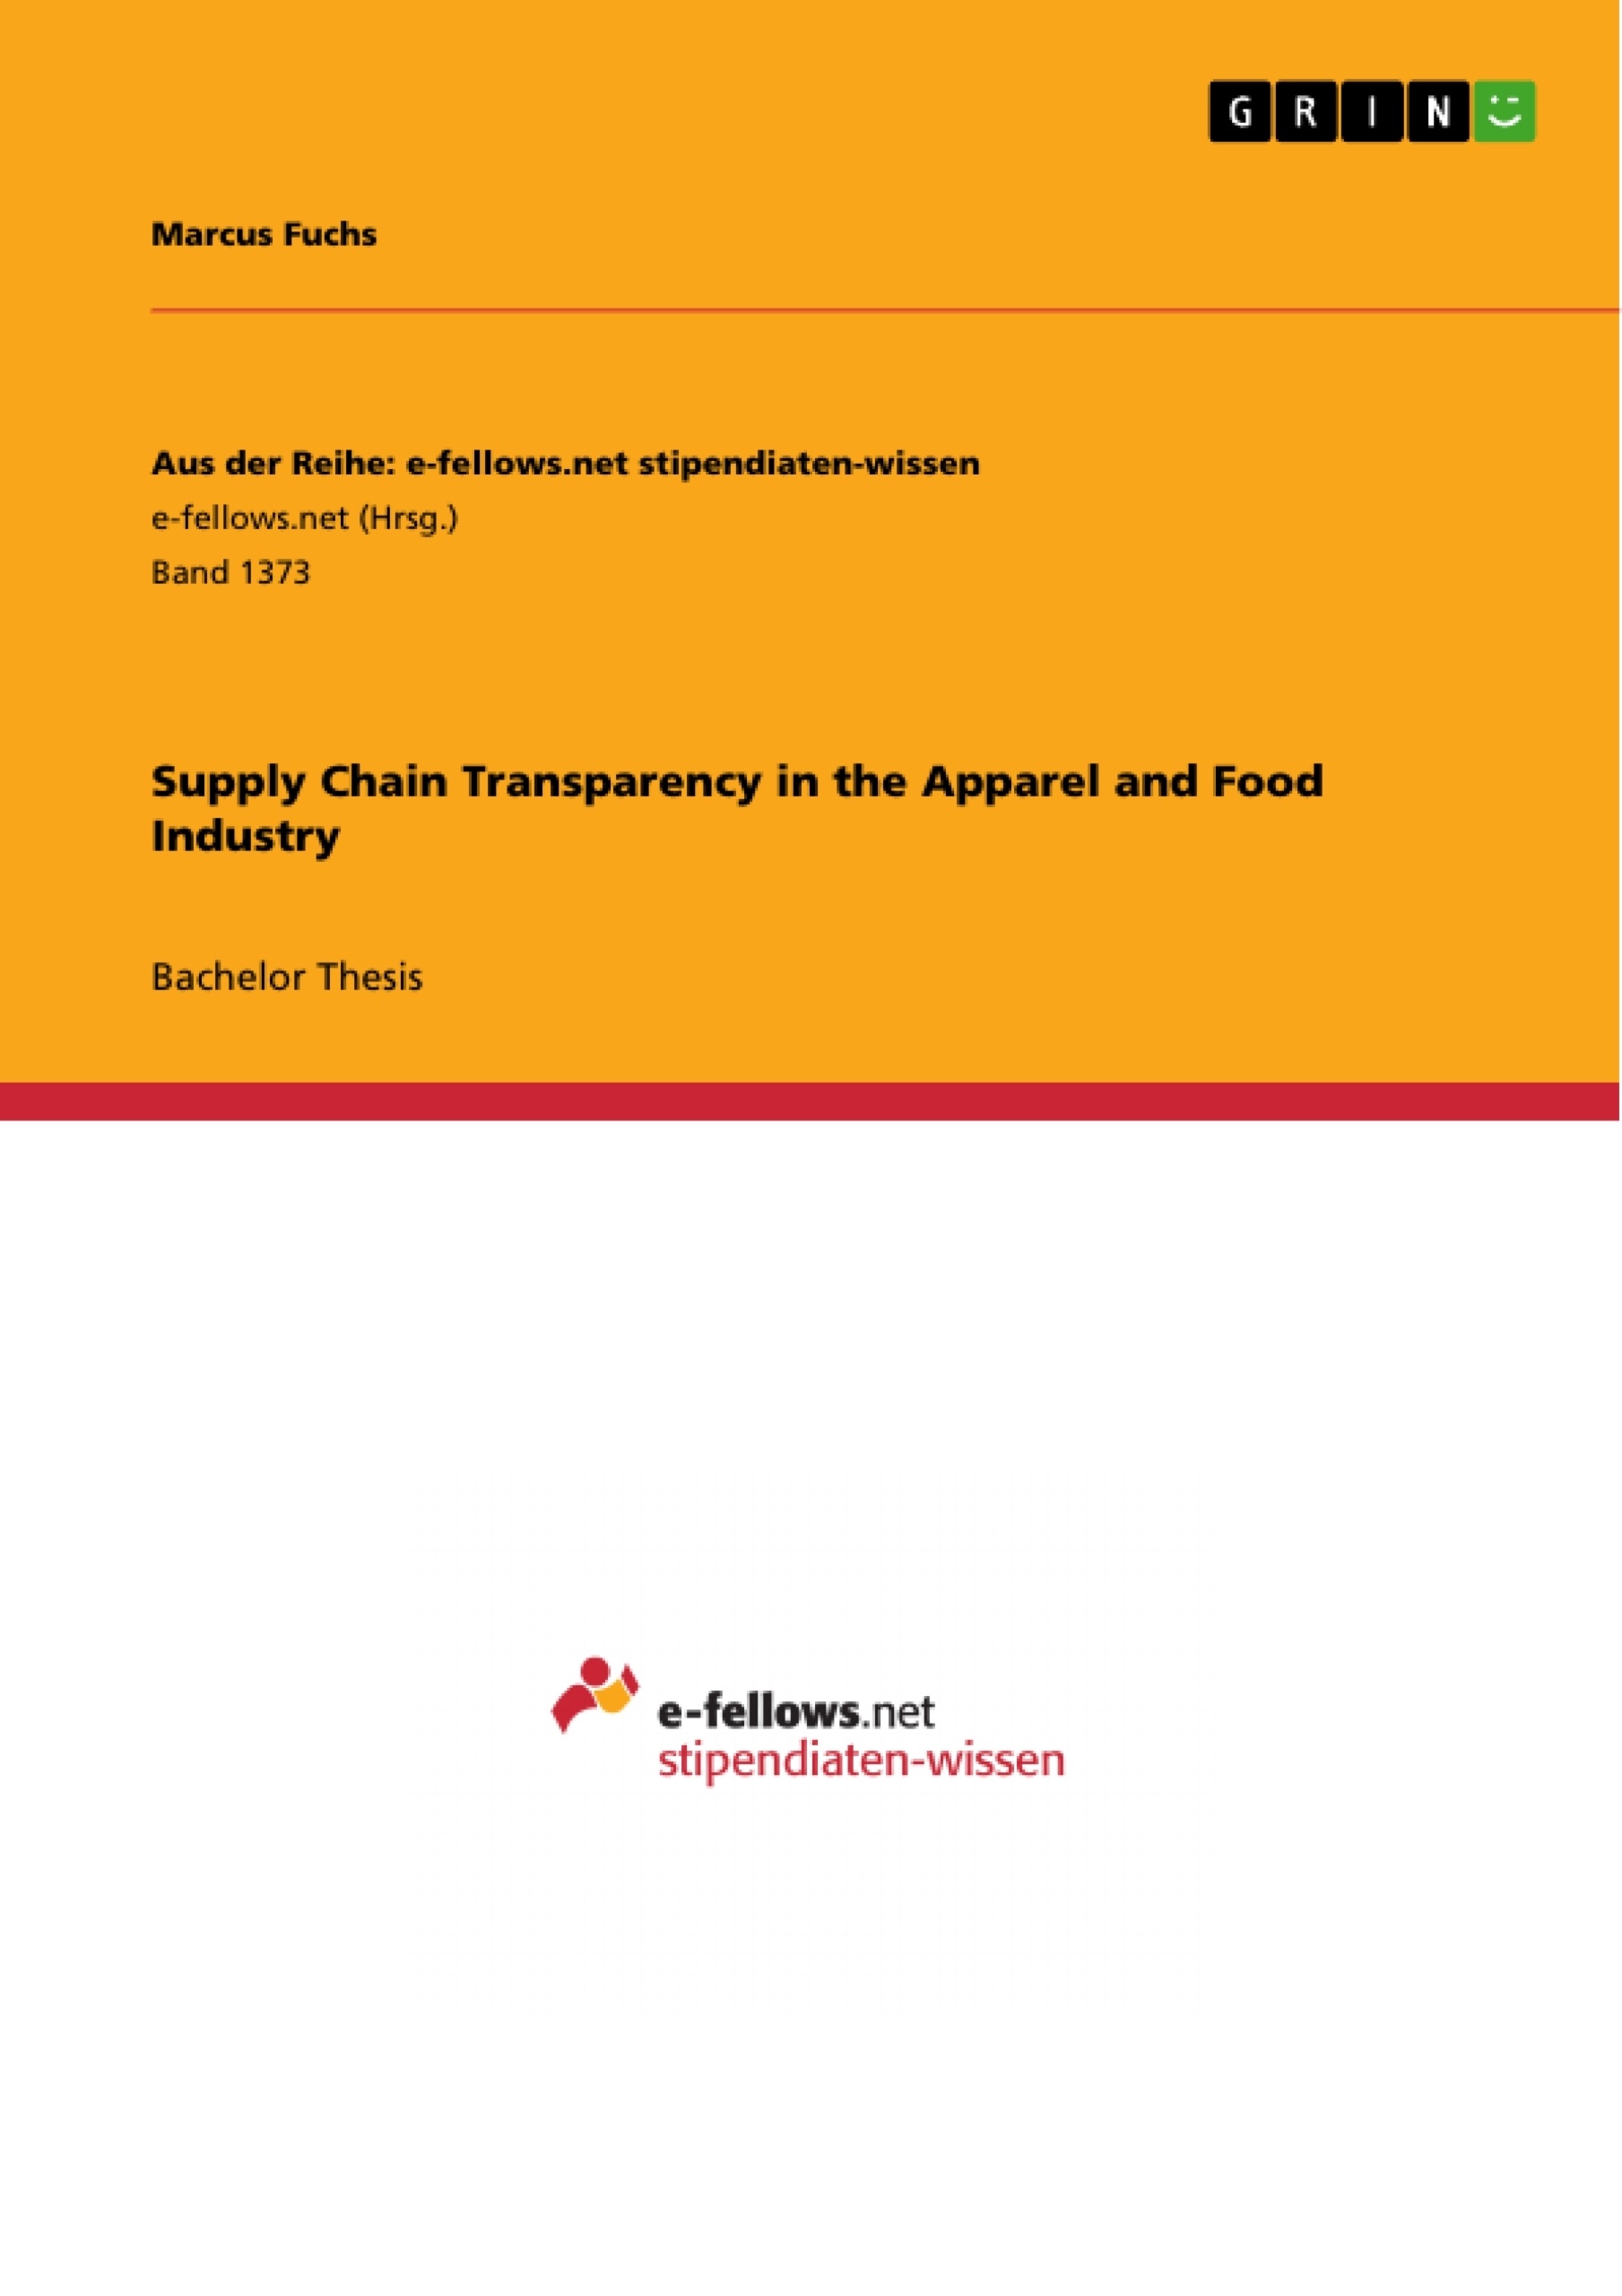 Title: Supply Chain Transparency in the Apparel and Food Industry